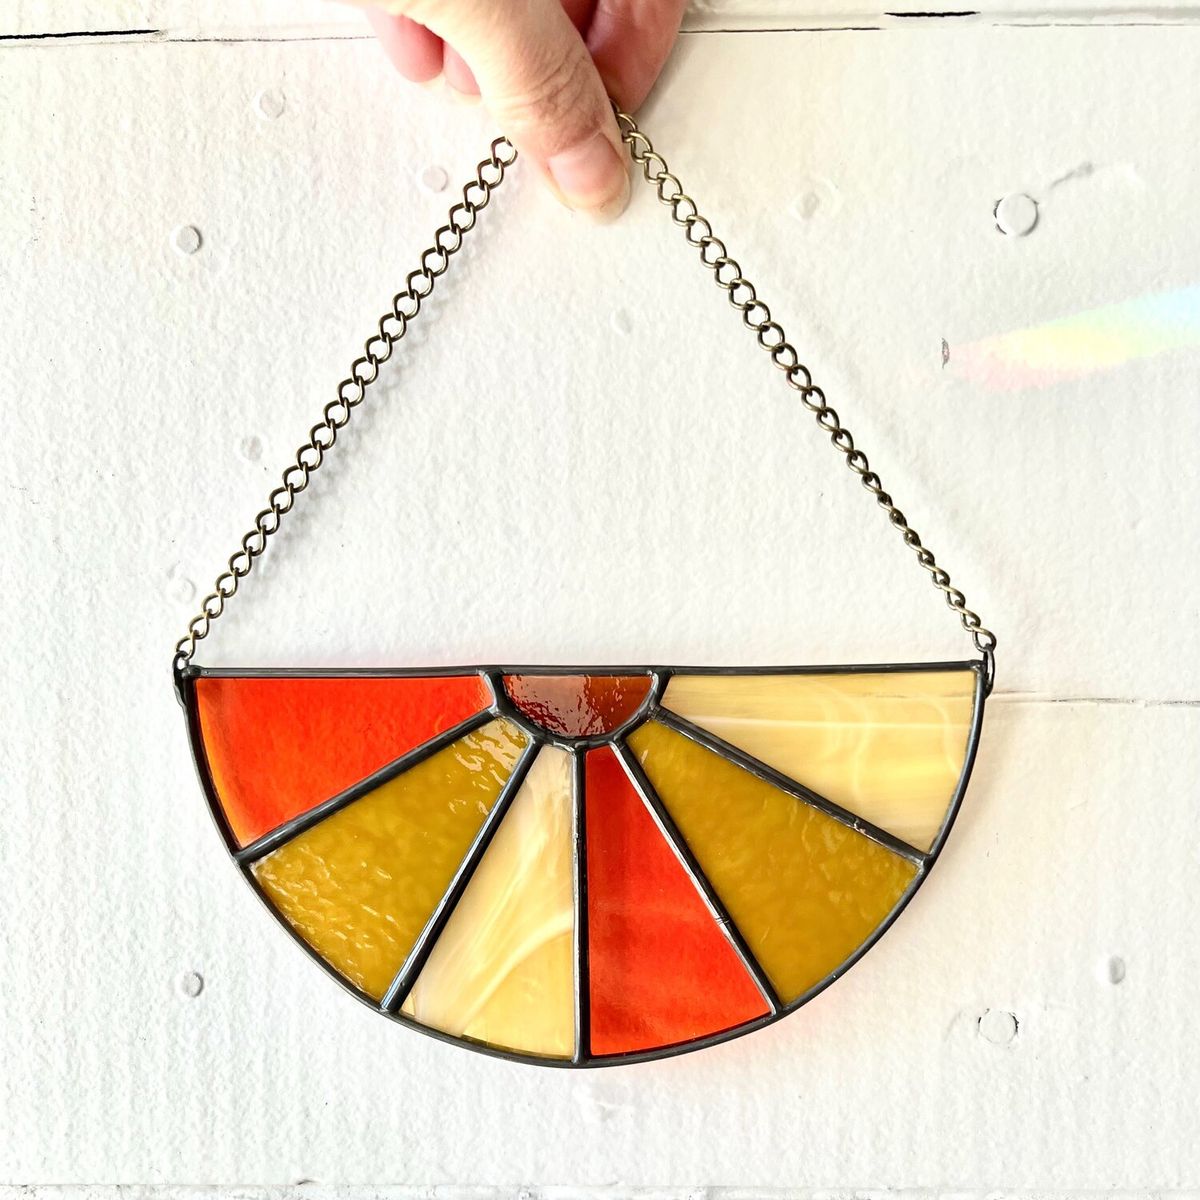 Intro to Stained Glass